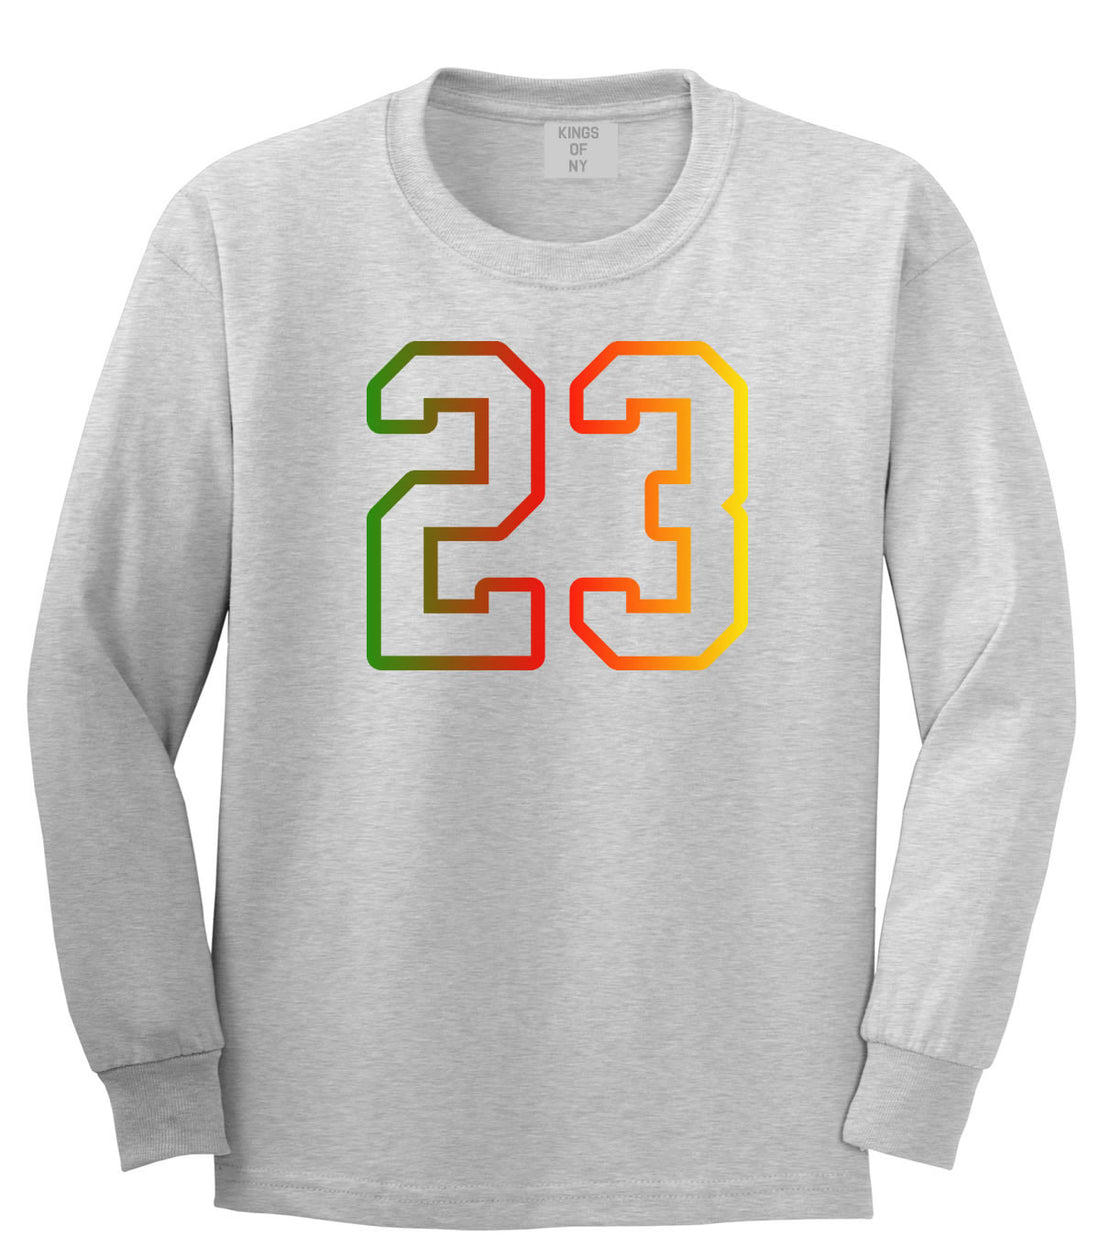 23 Cement Print Colorful Jersey Long Sleeve T-Shirt in Grey By Kings Of NY